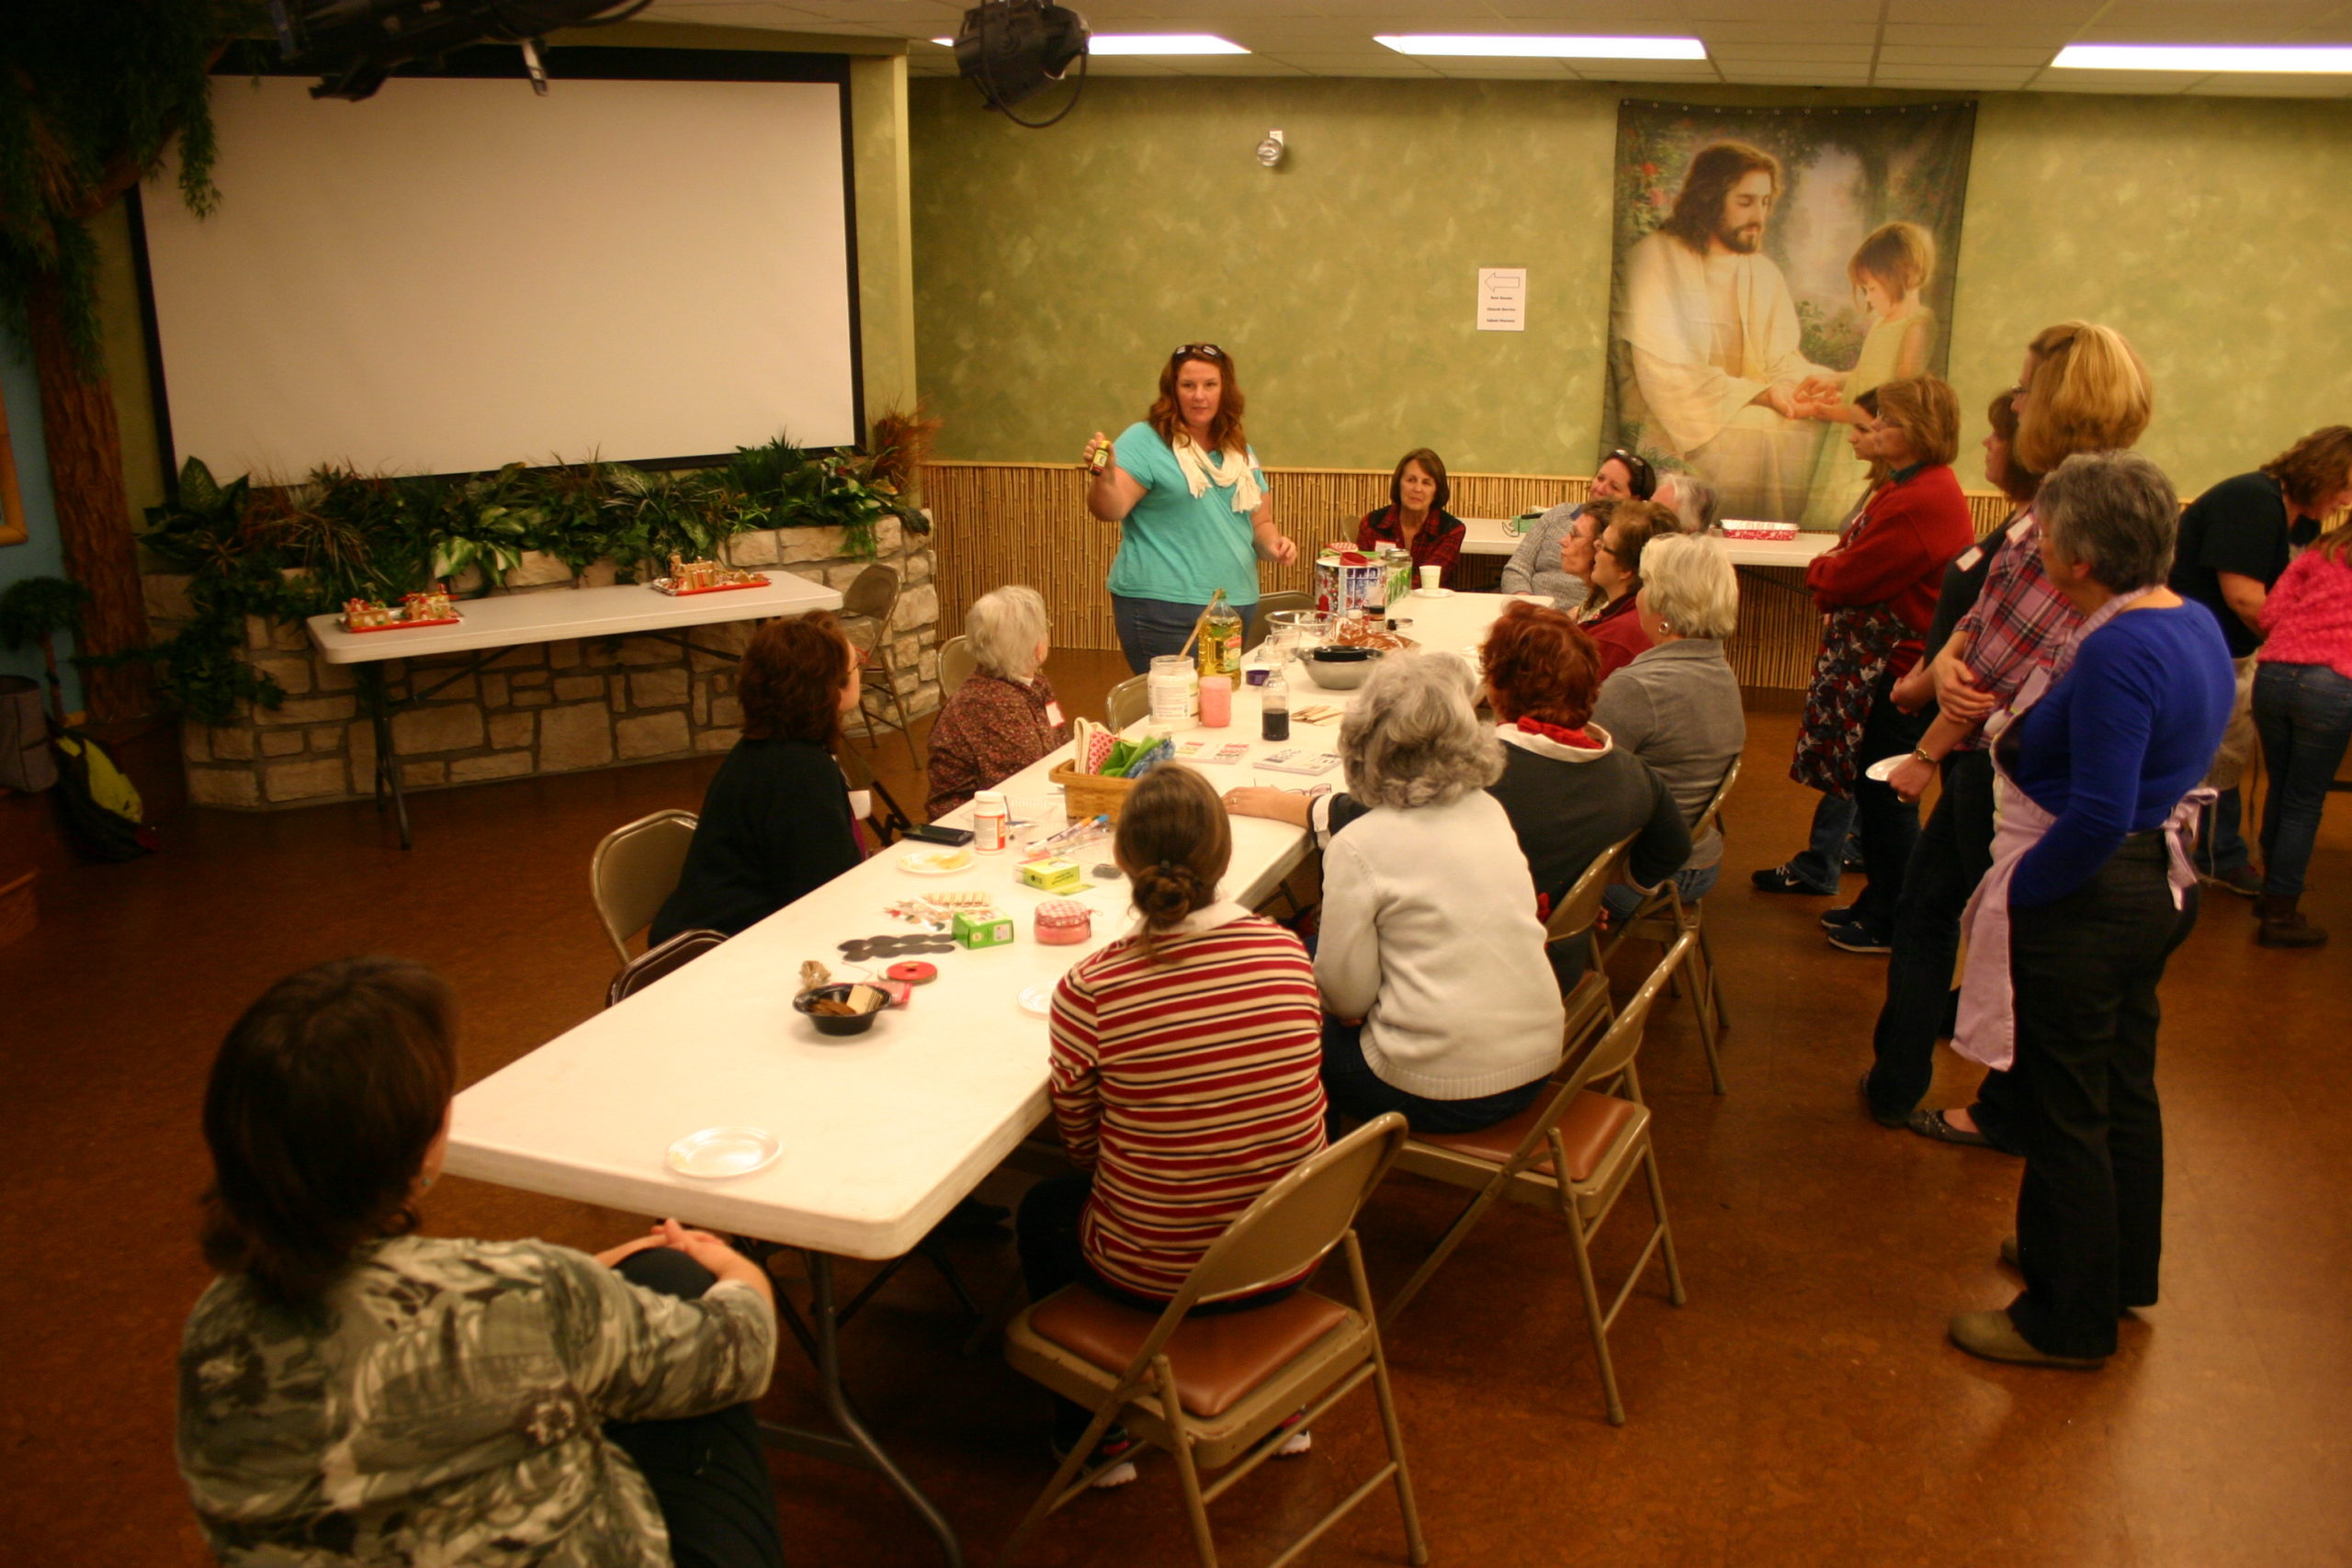 2015-12-11 Inspired Sisters of Zions Church of Hamburg - Be Social Let's Make Decorated Cookies and Sugar Scrub